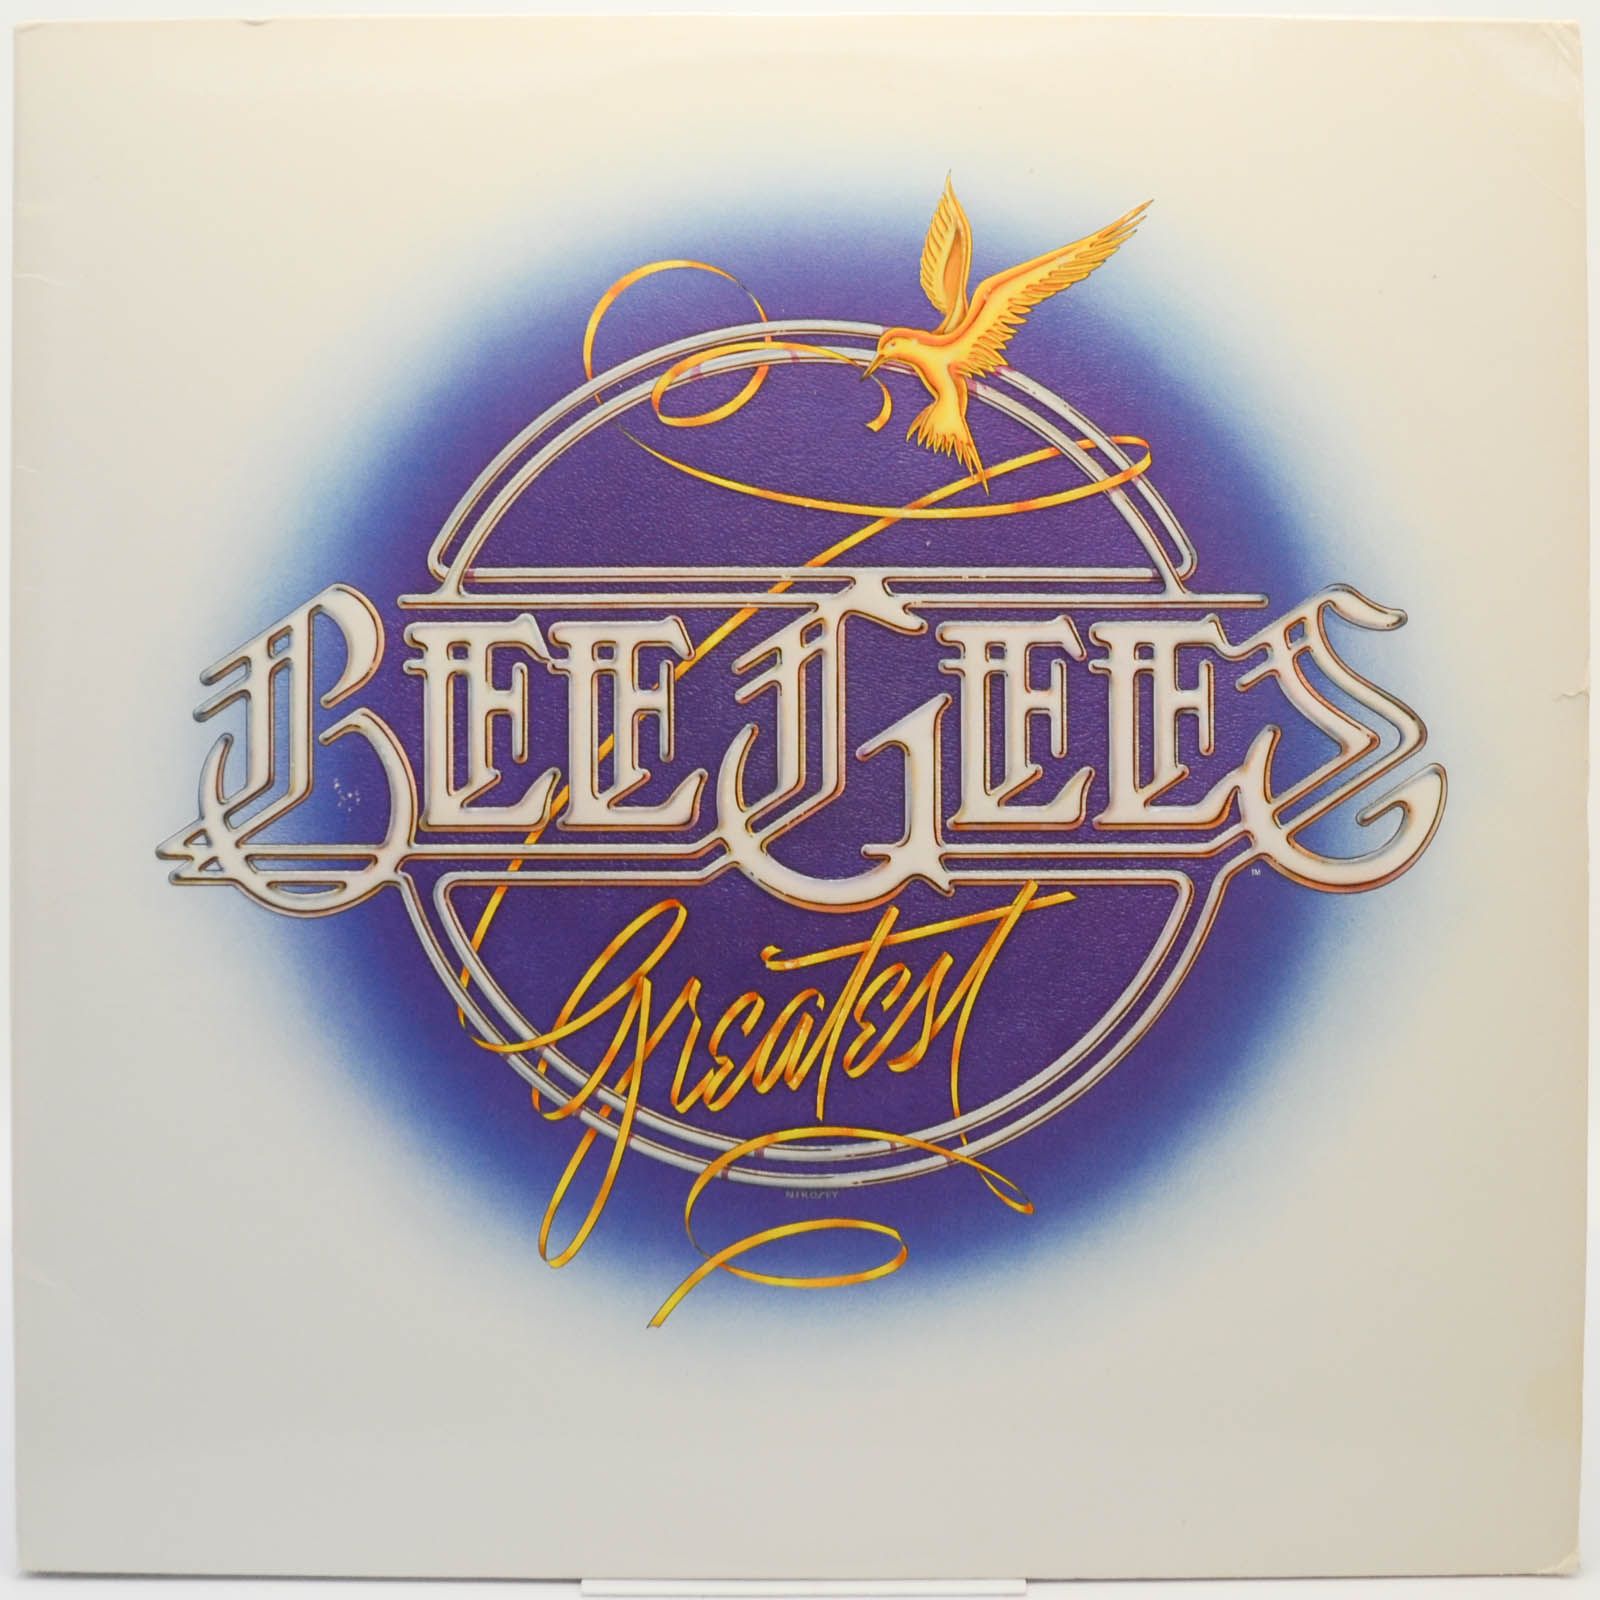 Bee Gees — Bee Gees Greatest (USA, 2LP), 1979